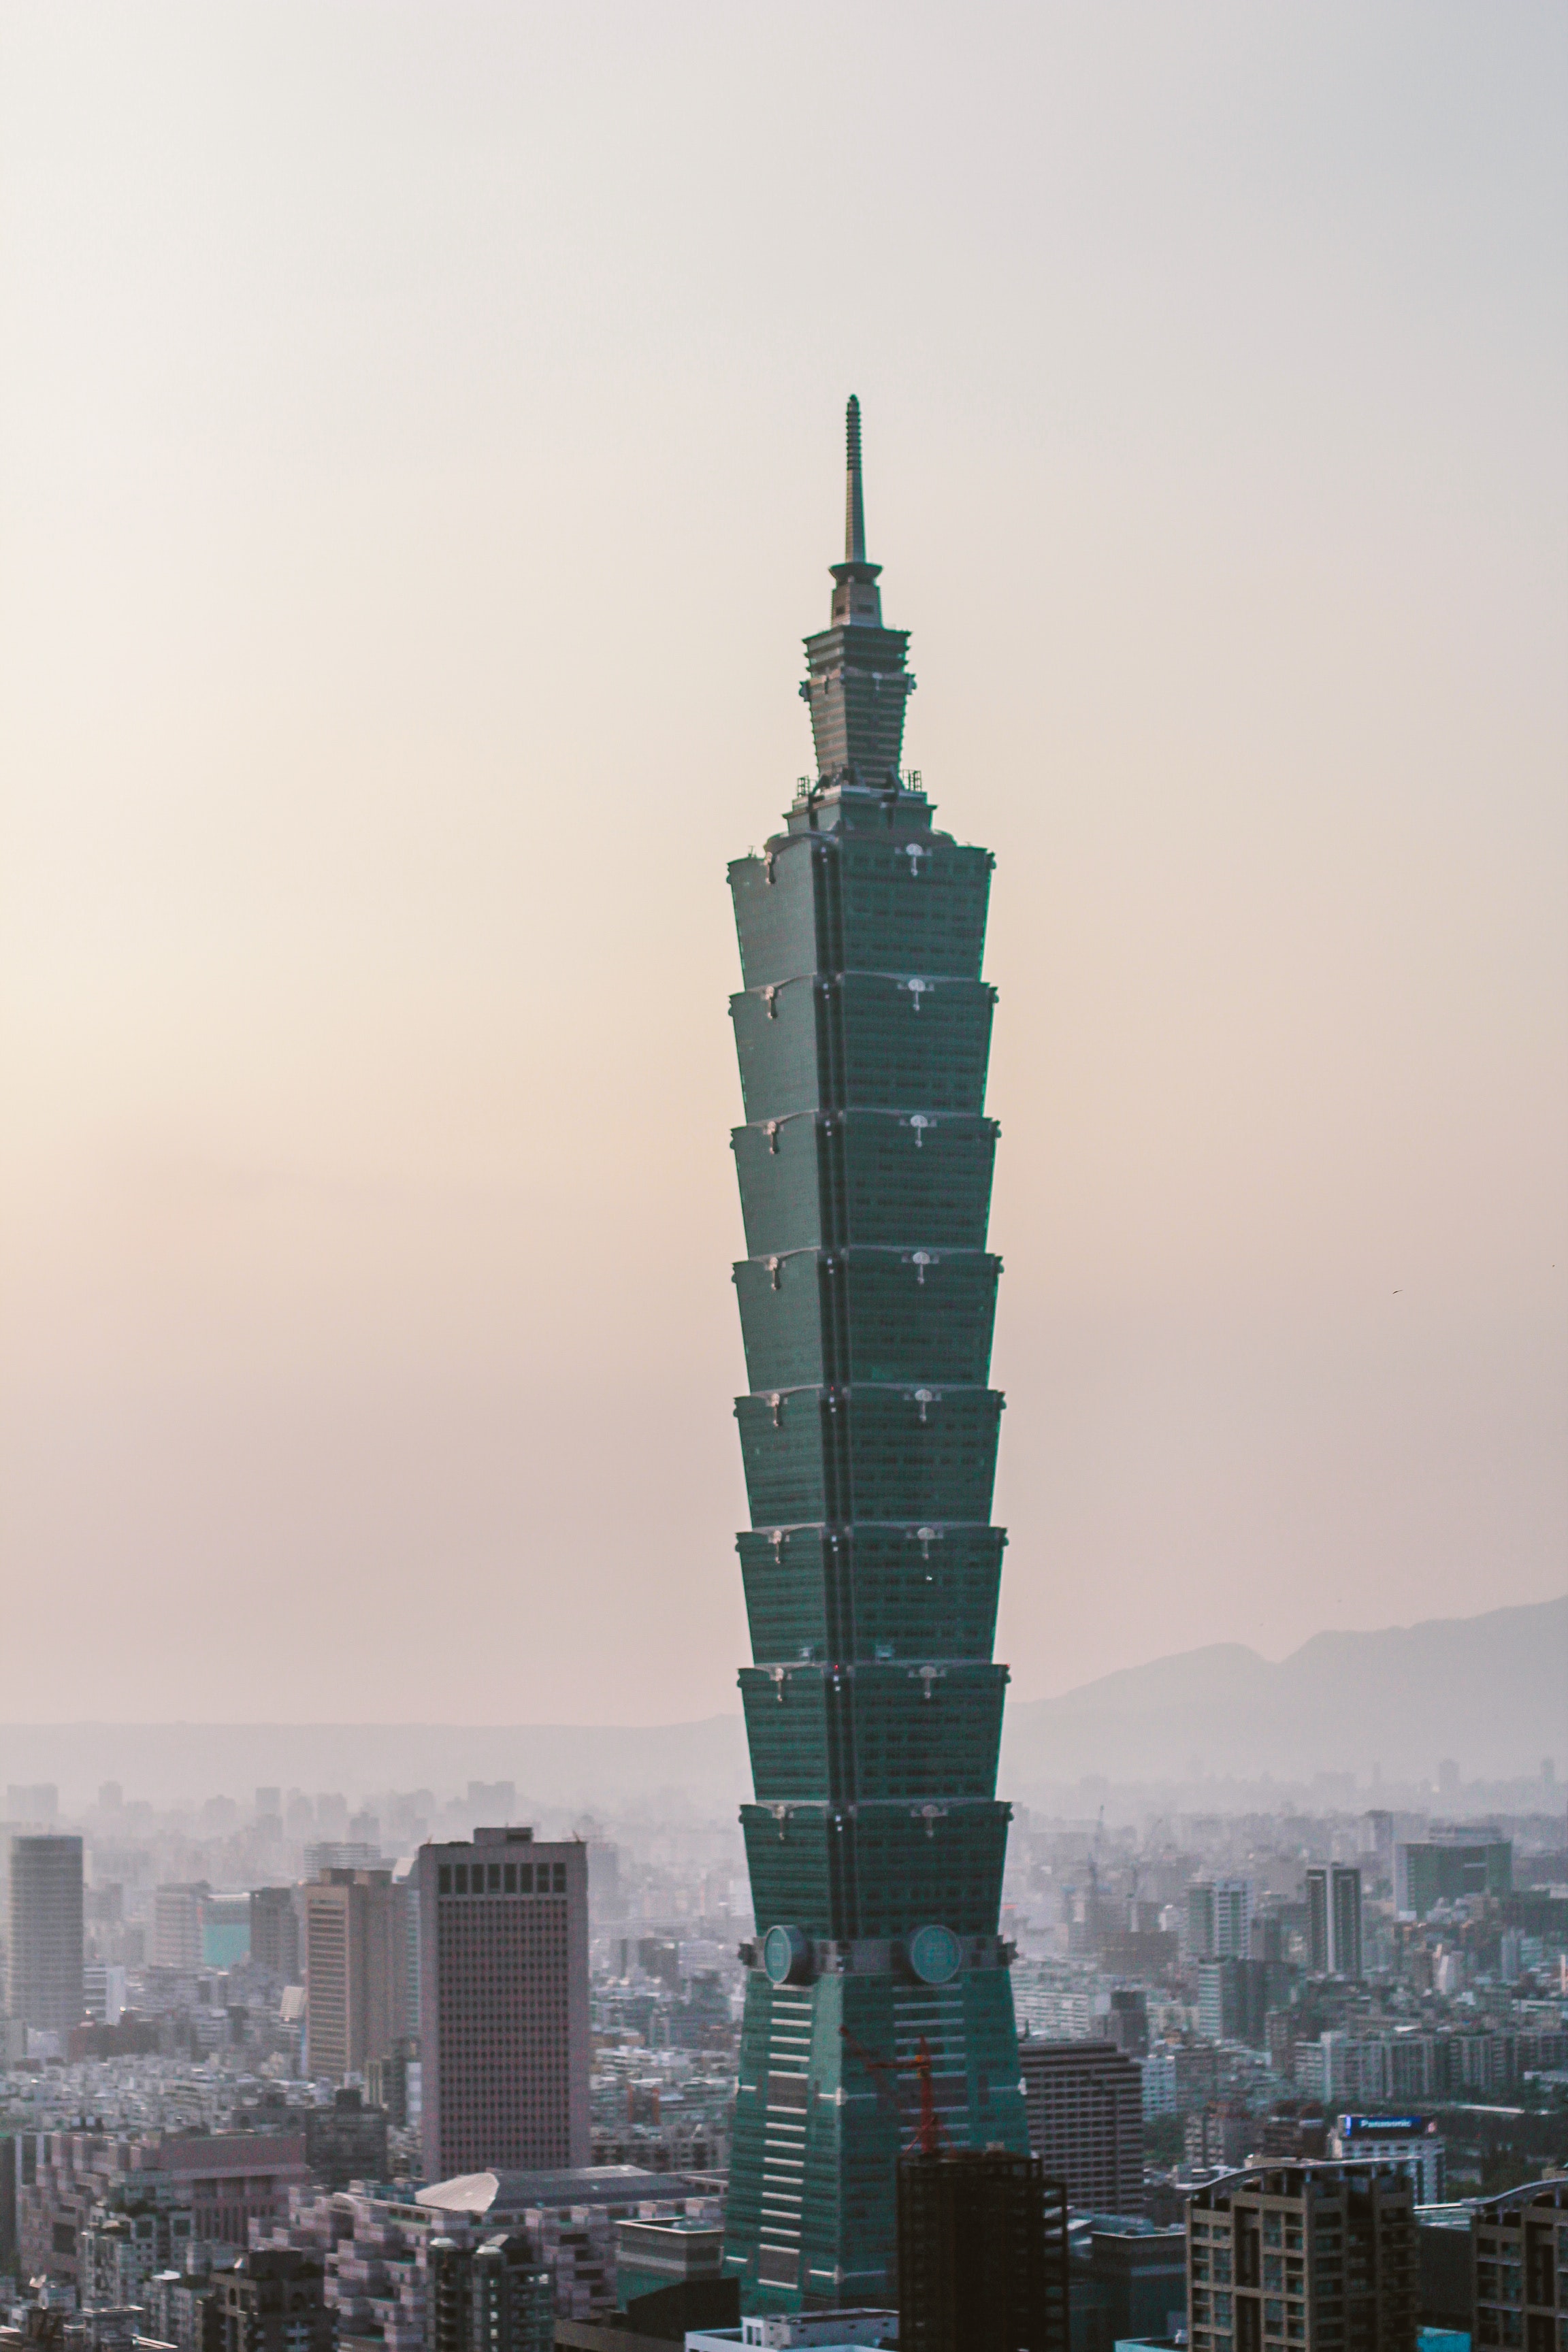 Taipei 101 under clear sky at daytime photo